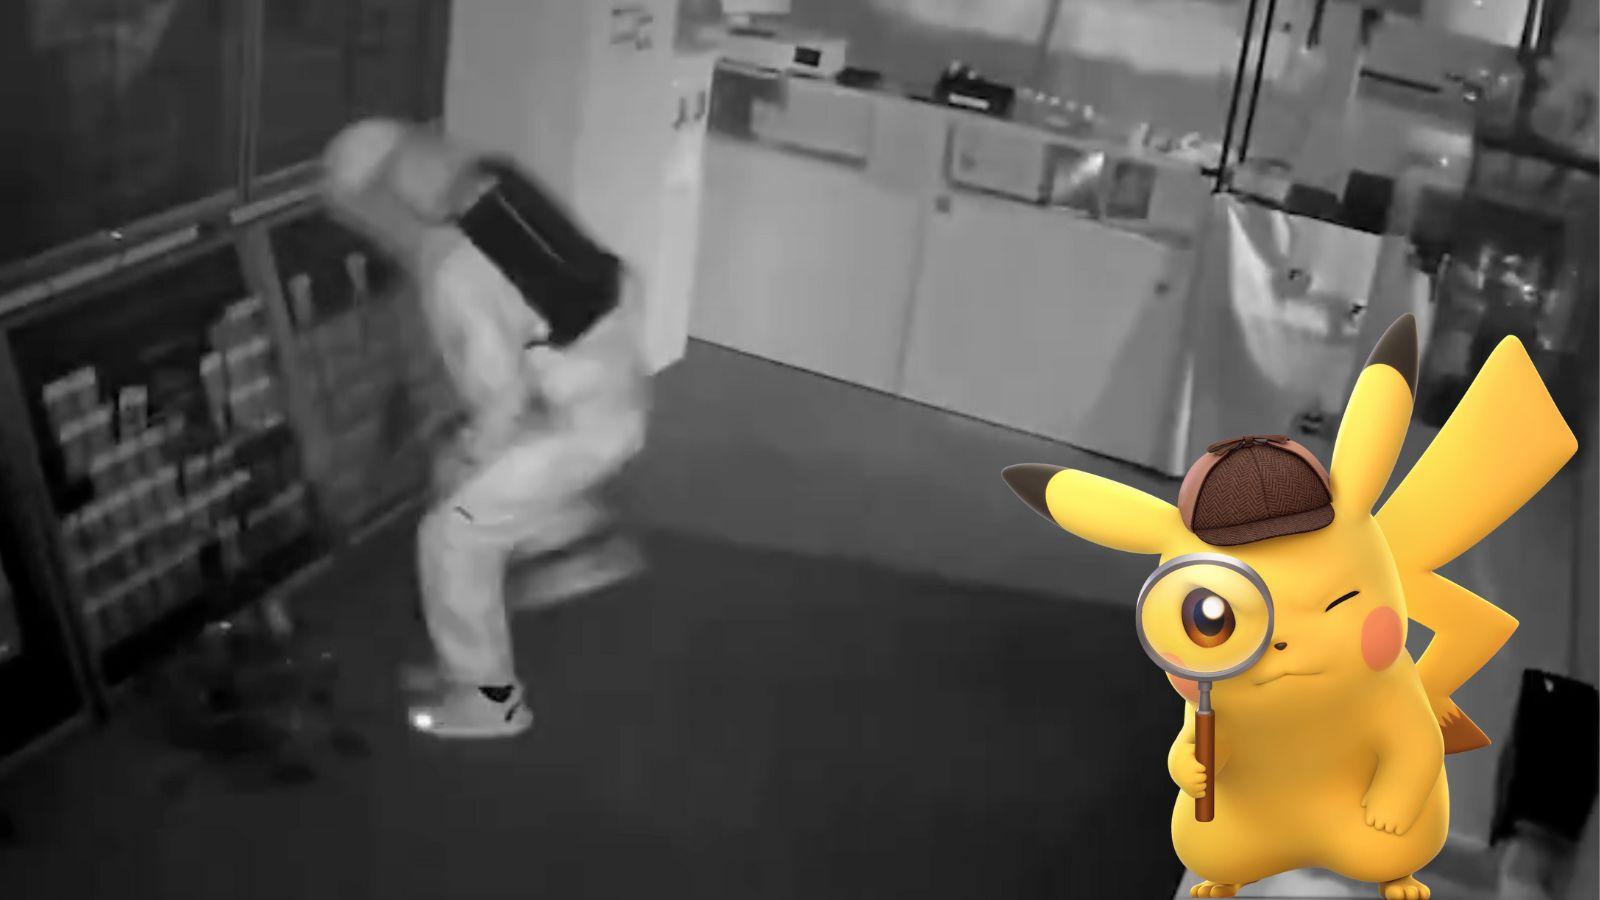 Footage of a Tokyo card store robbery showing a man with a backpack smashing cases of cards and Detective Pikachu investigating the crime